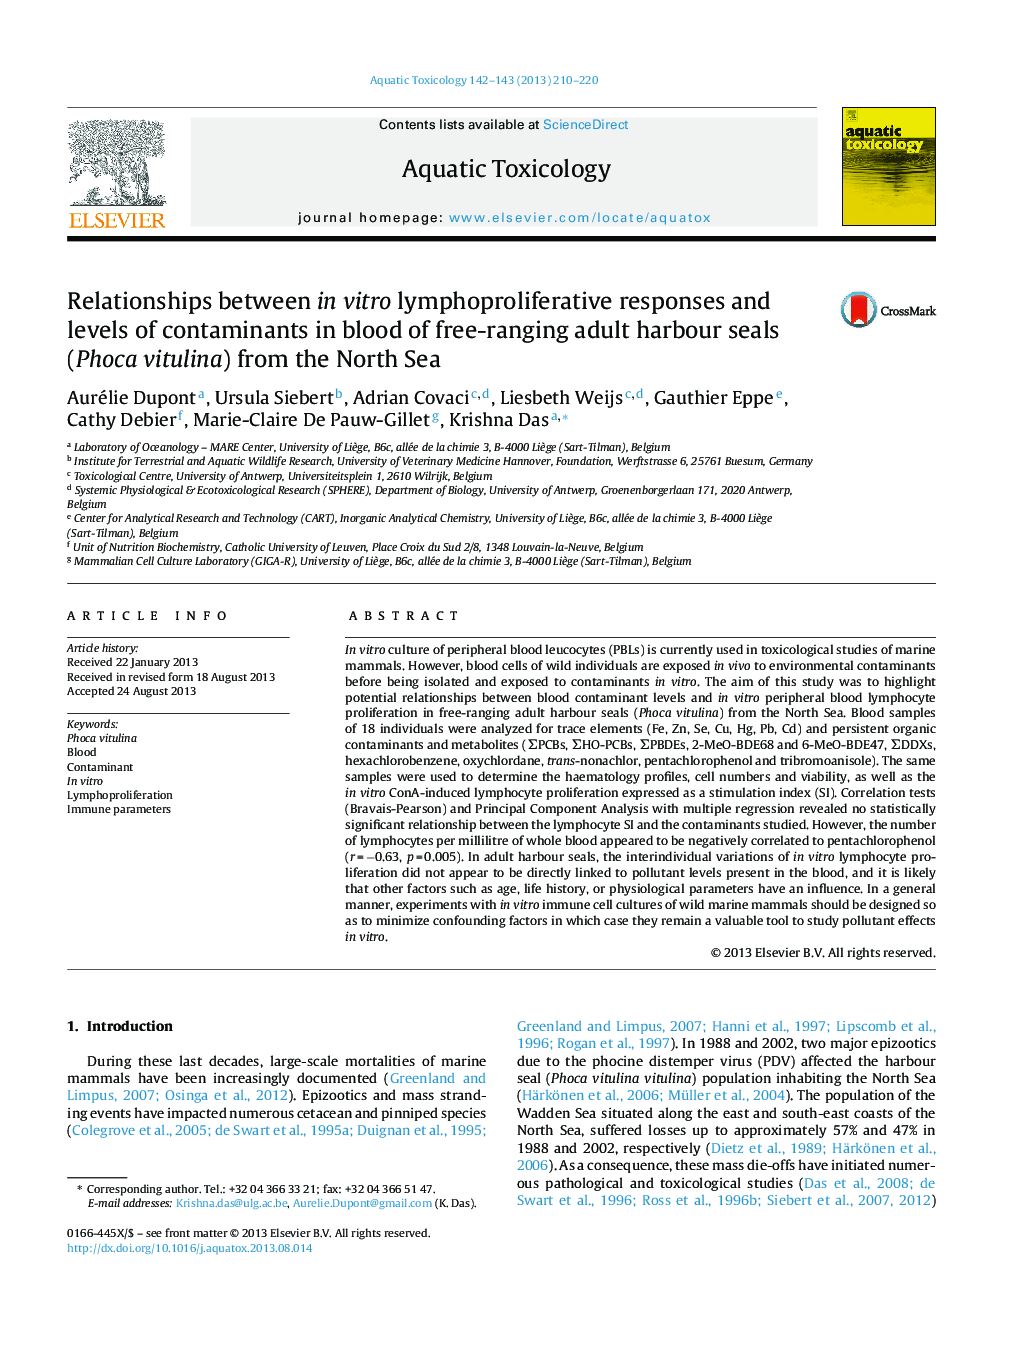 Relationships between in vitro lymphoproliferative responses and levels of contaminants in blood of free-ranging adult harbour seals (Phoca vitulina) from the North Sea